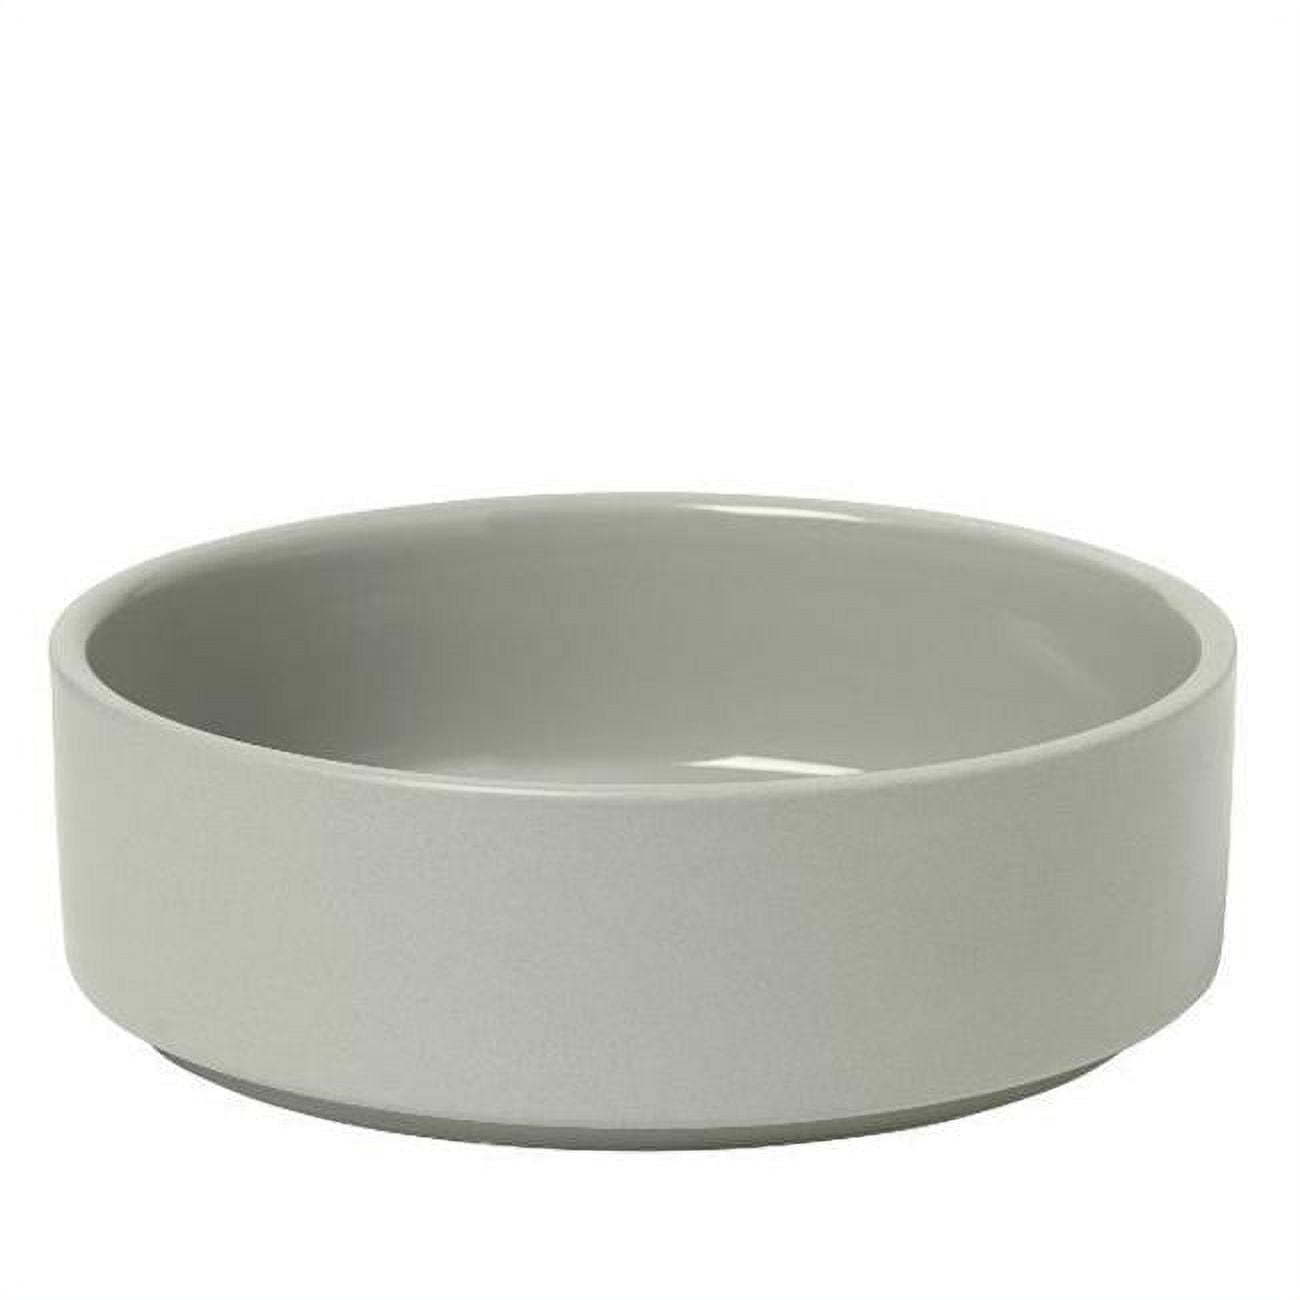 Picture of Blomus 63978.4 6 in. Pilar Shallow Bowl, Mirage Grey - Set of 4